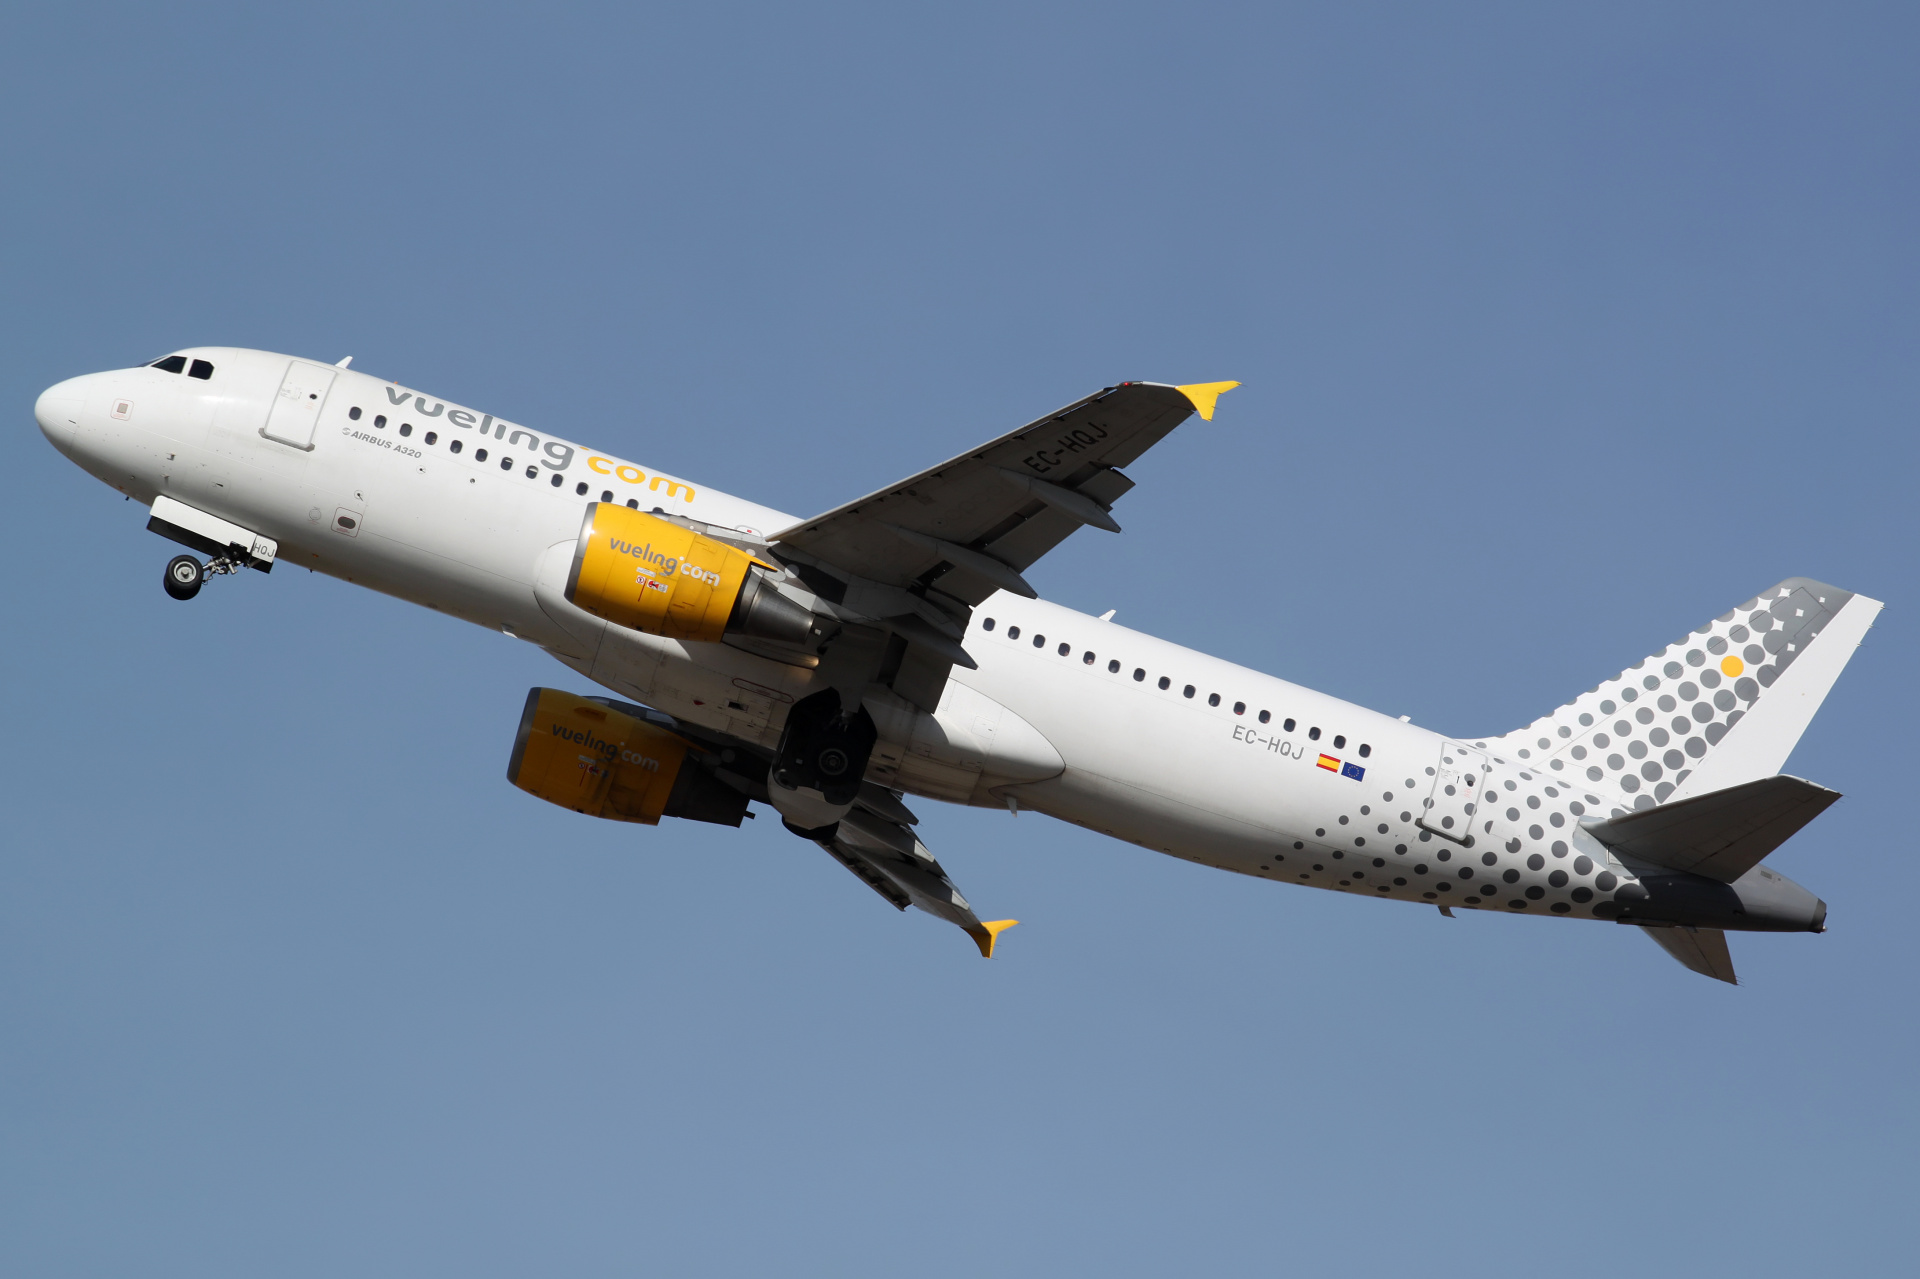 EC-HQJ (Samoloty » Spotting na EPWA » Airbus A320-200 » Vueling Airlines)